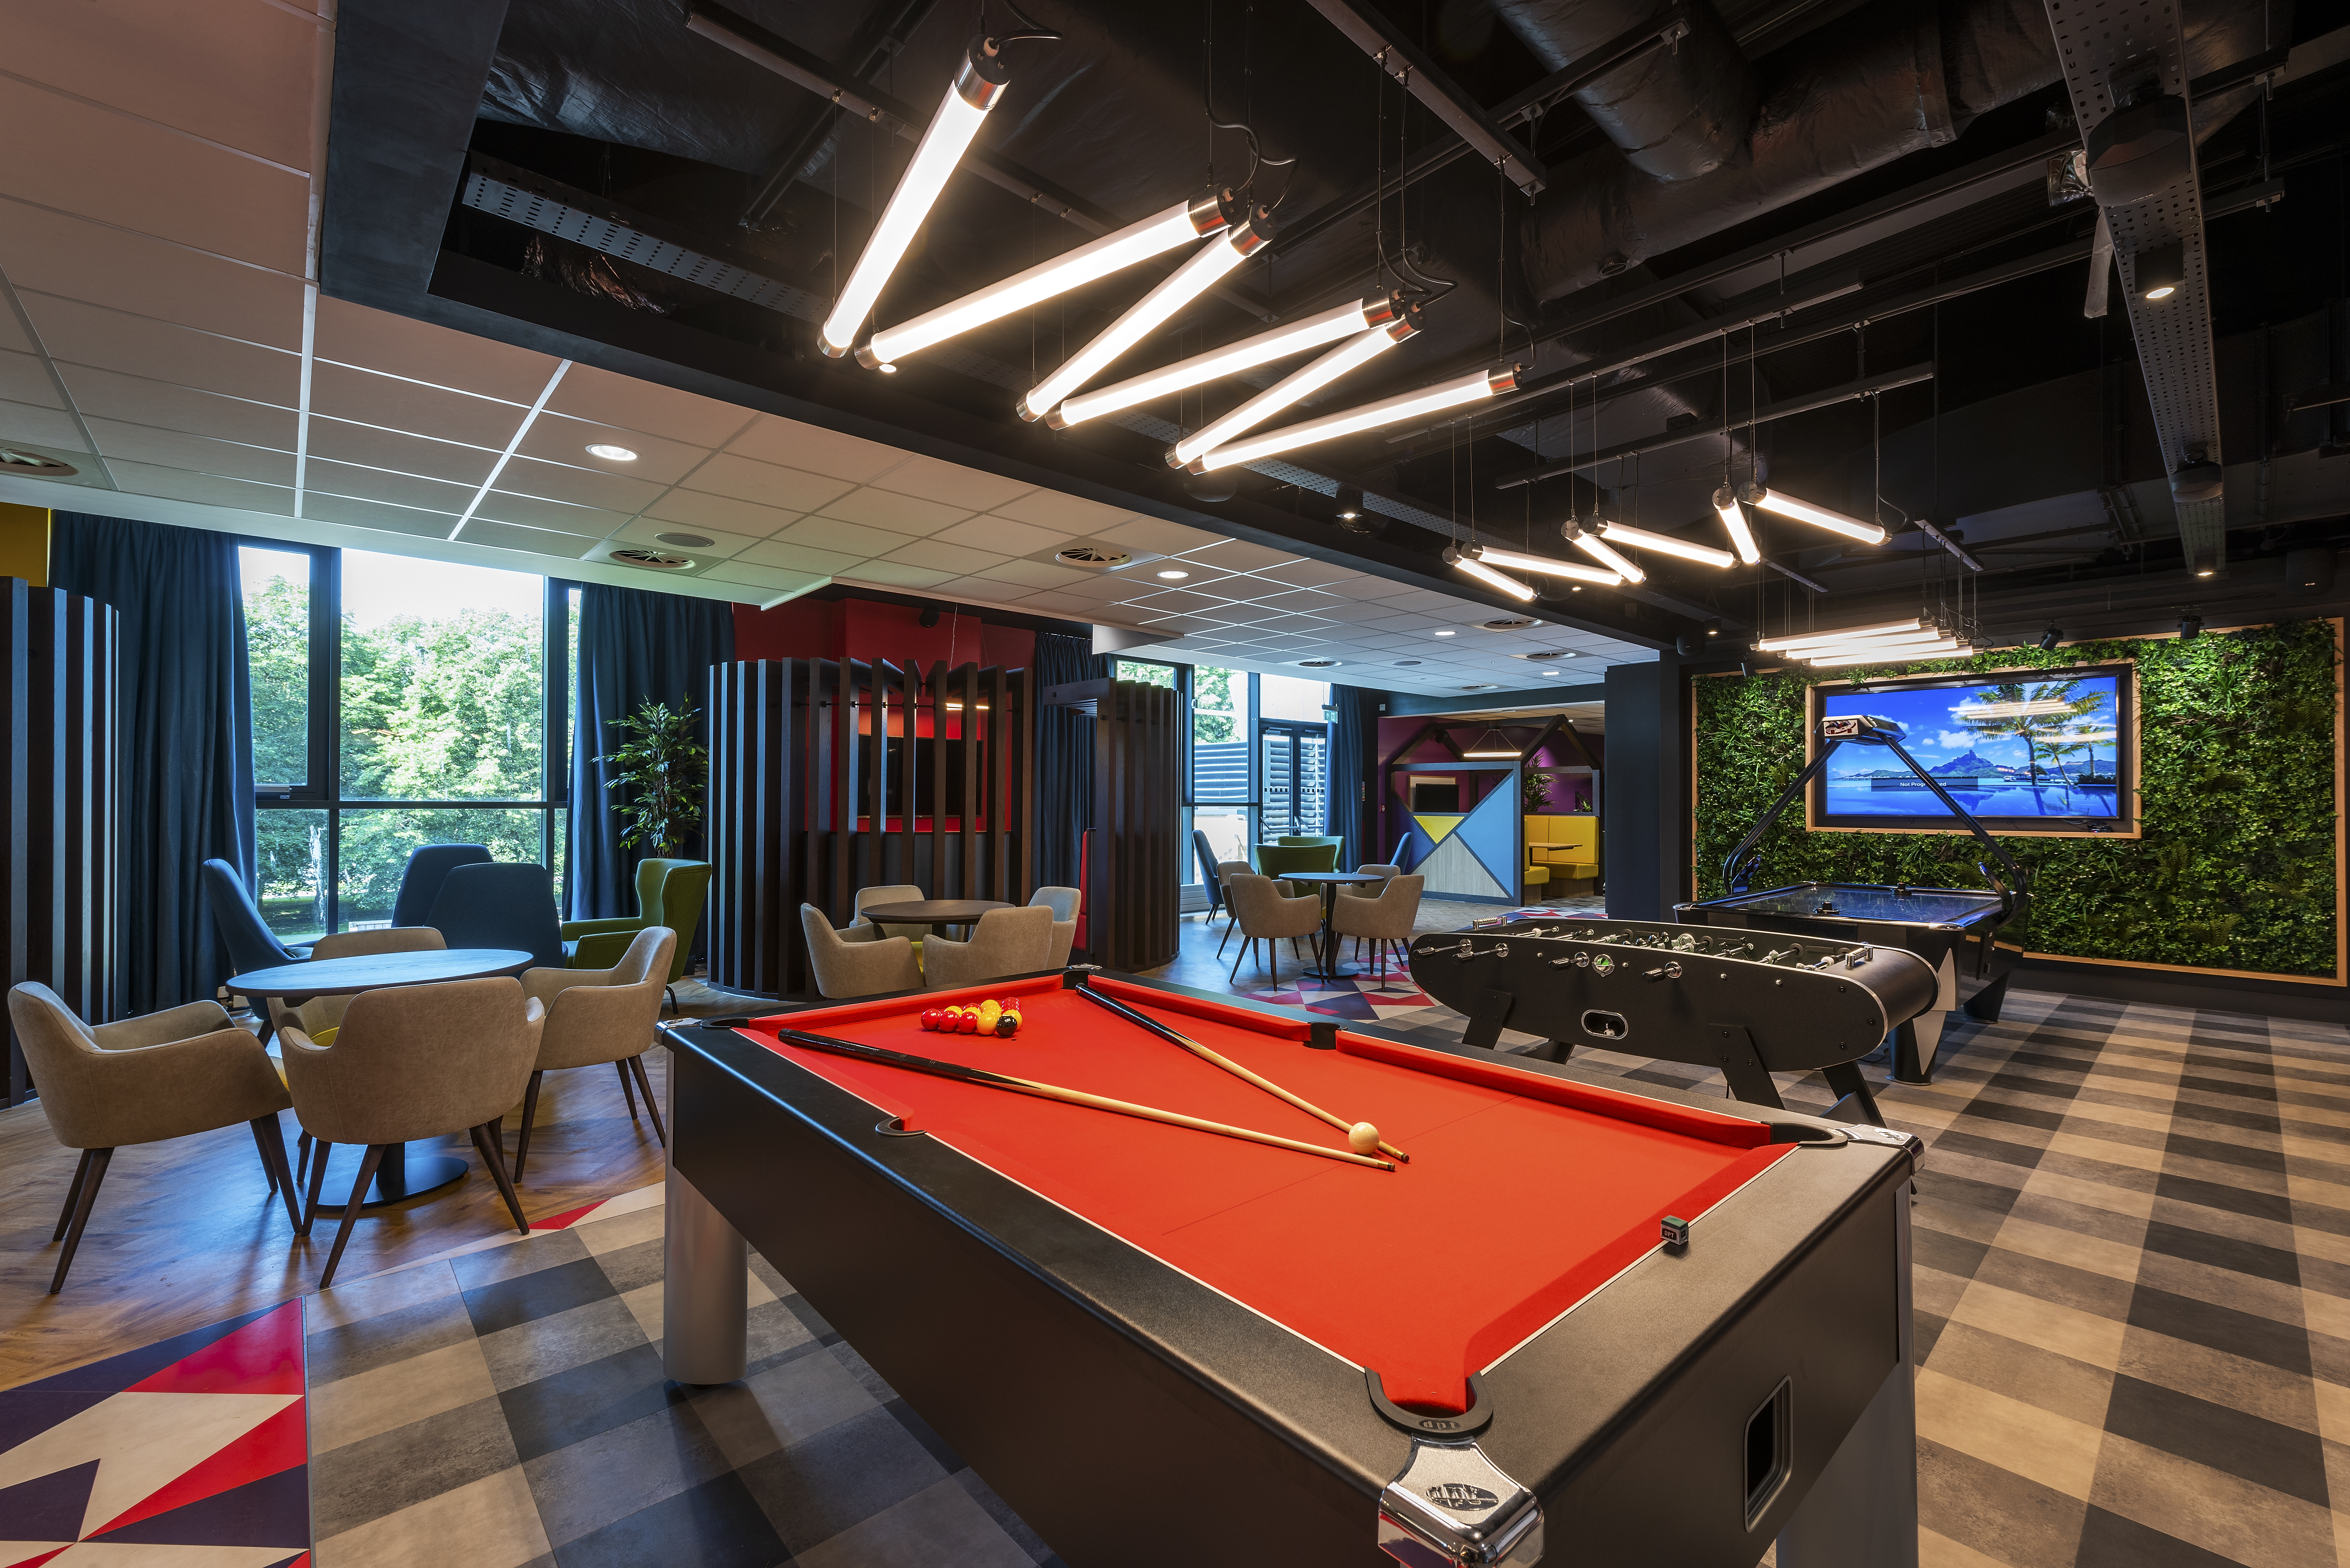 Gaming area with a mix of board games, pool and table tennis